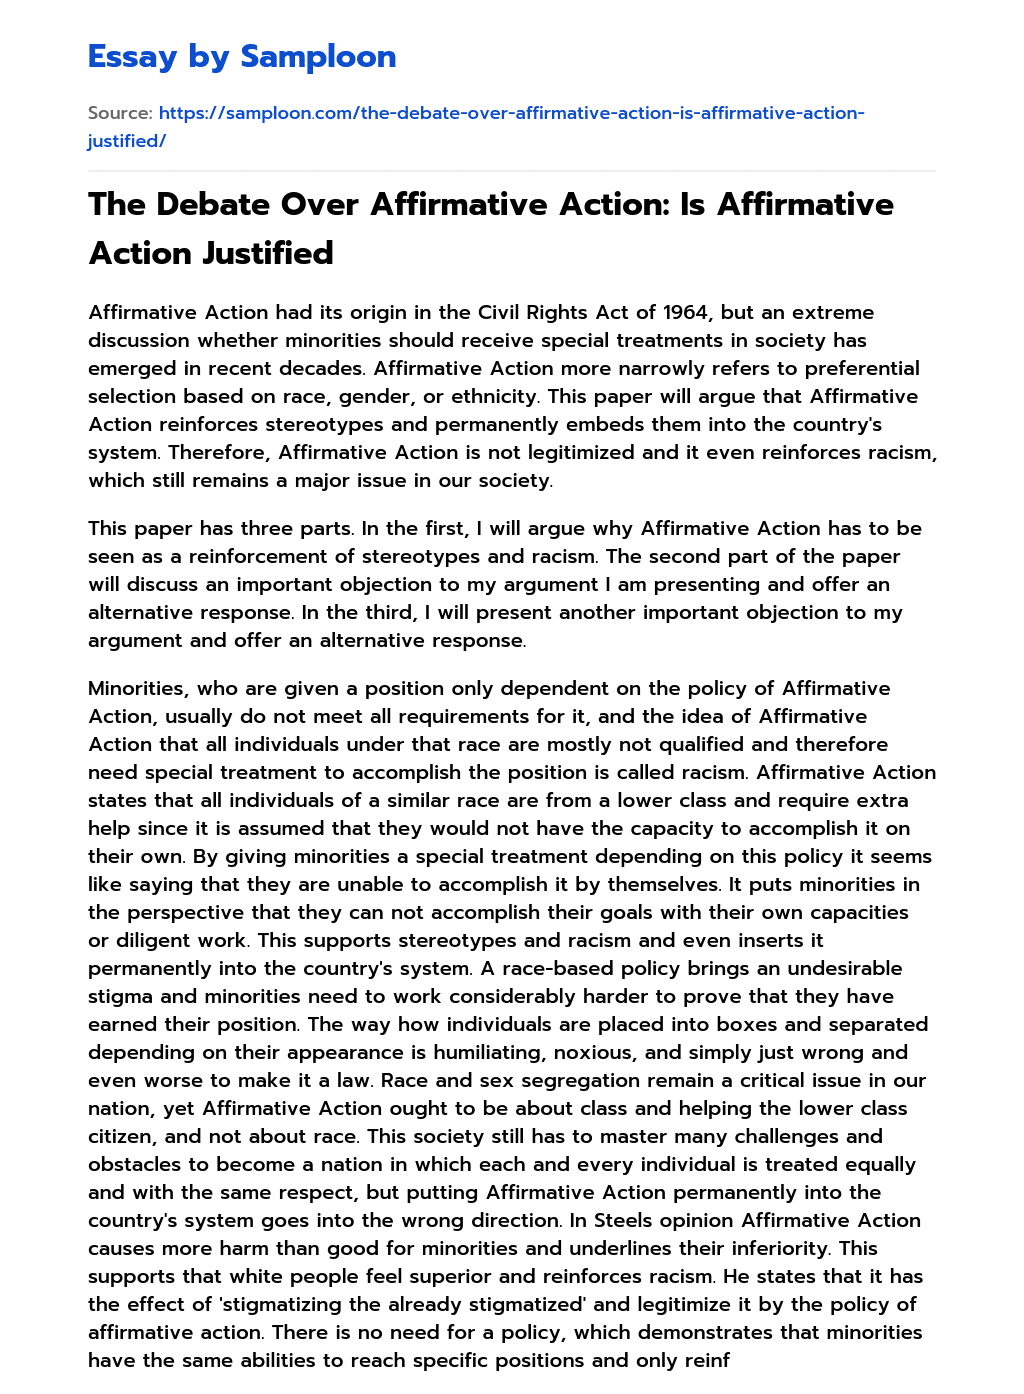 The Debate Over Affirmative Action: Is Affirmative Action Justified essay